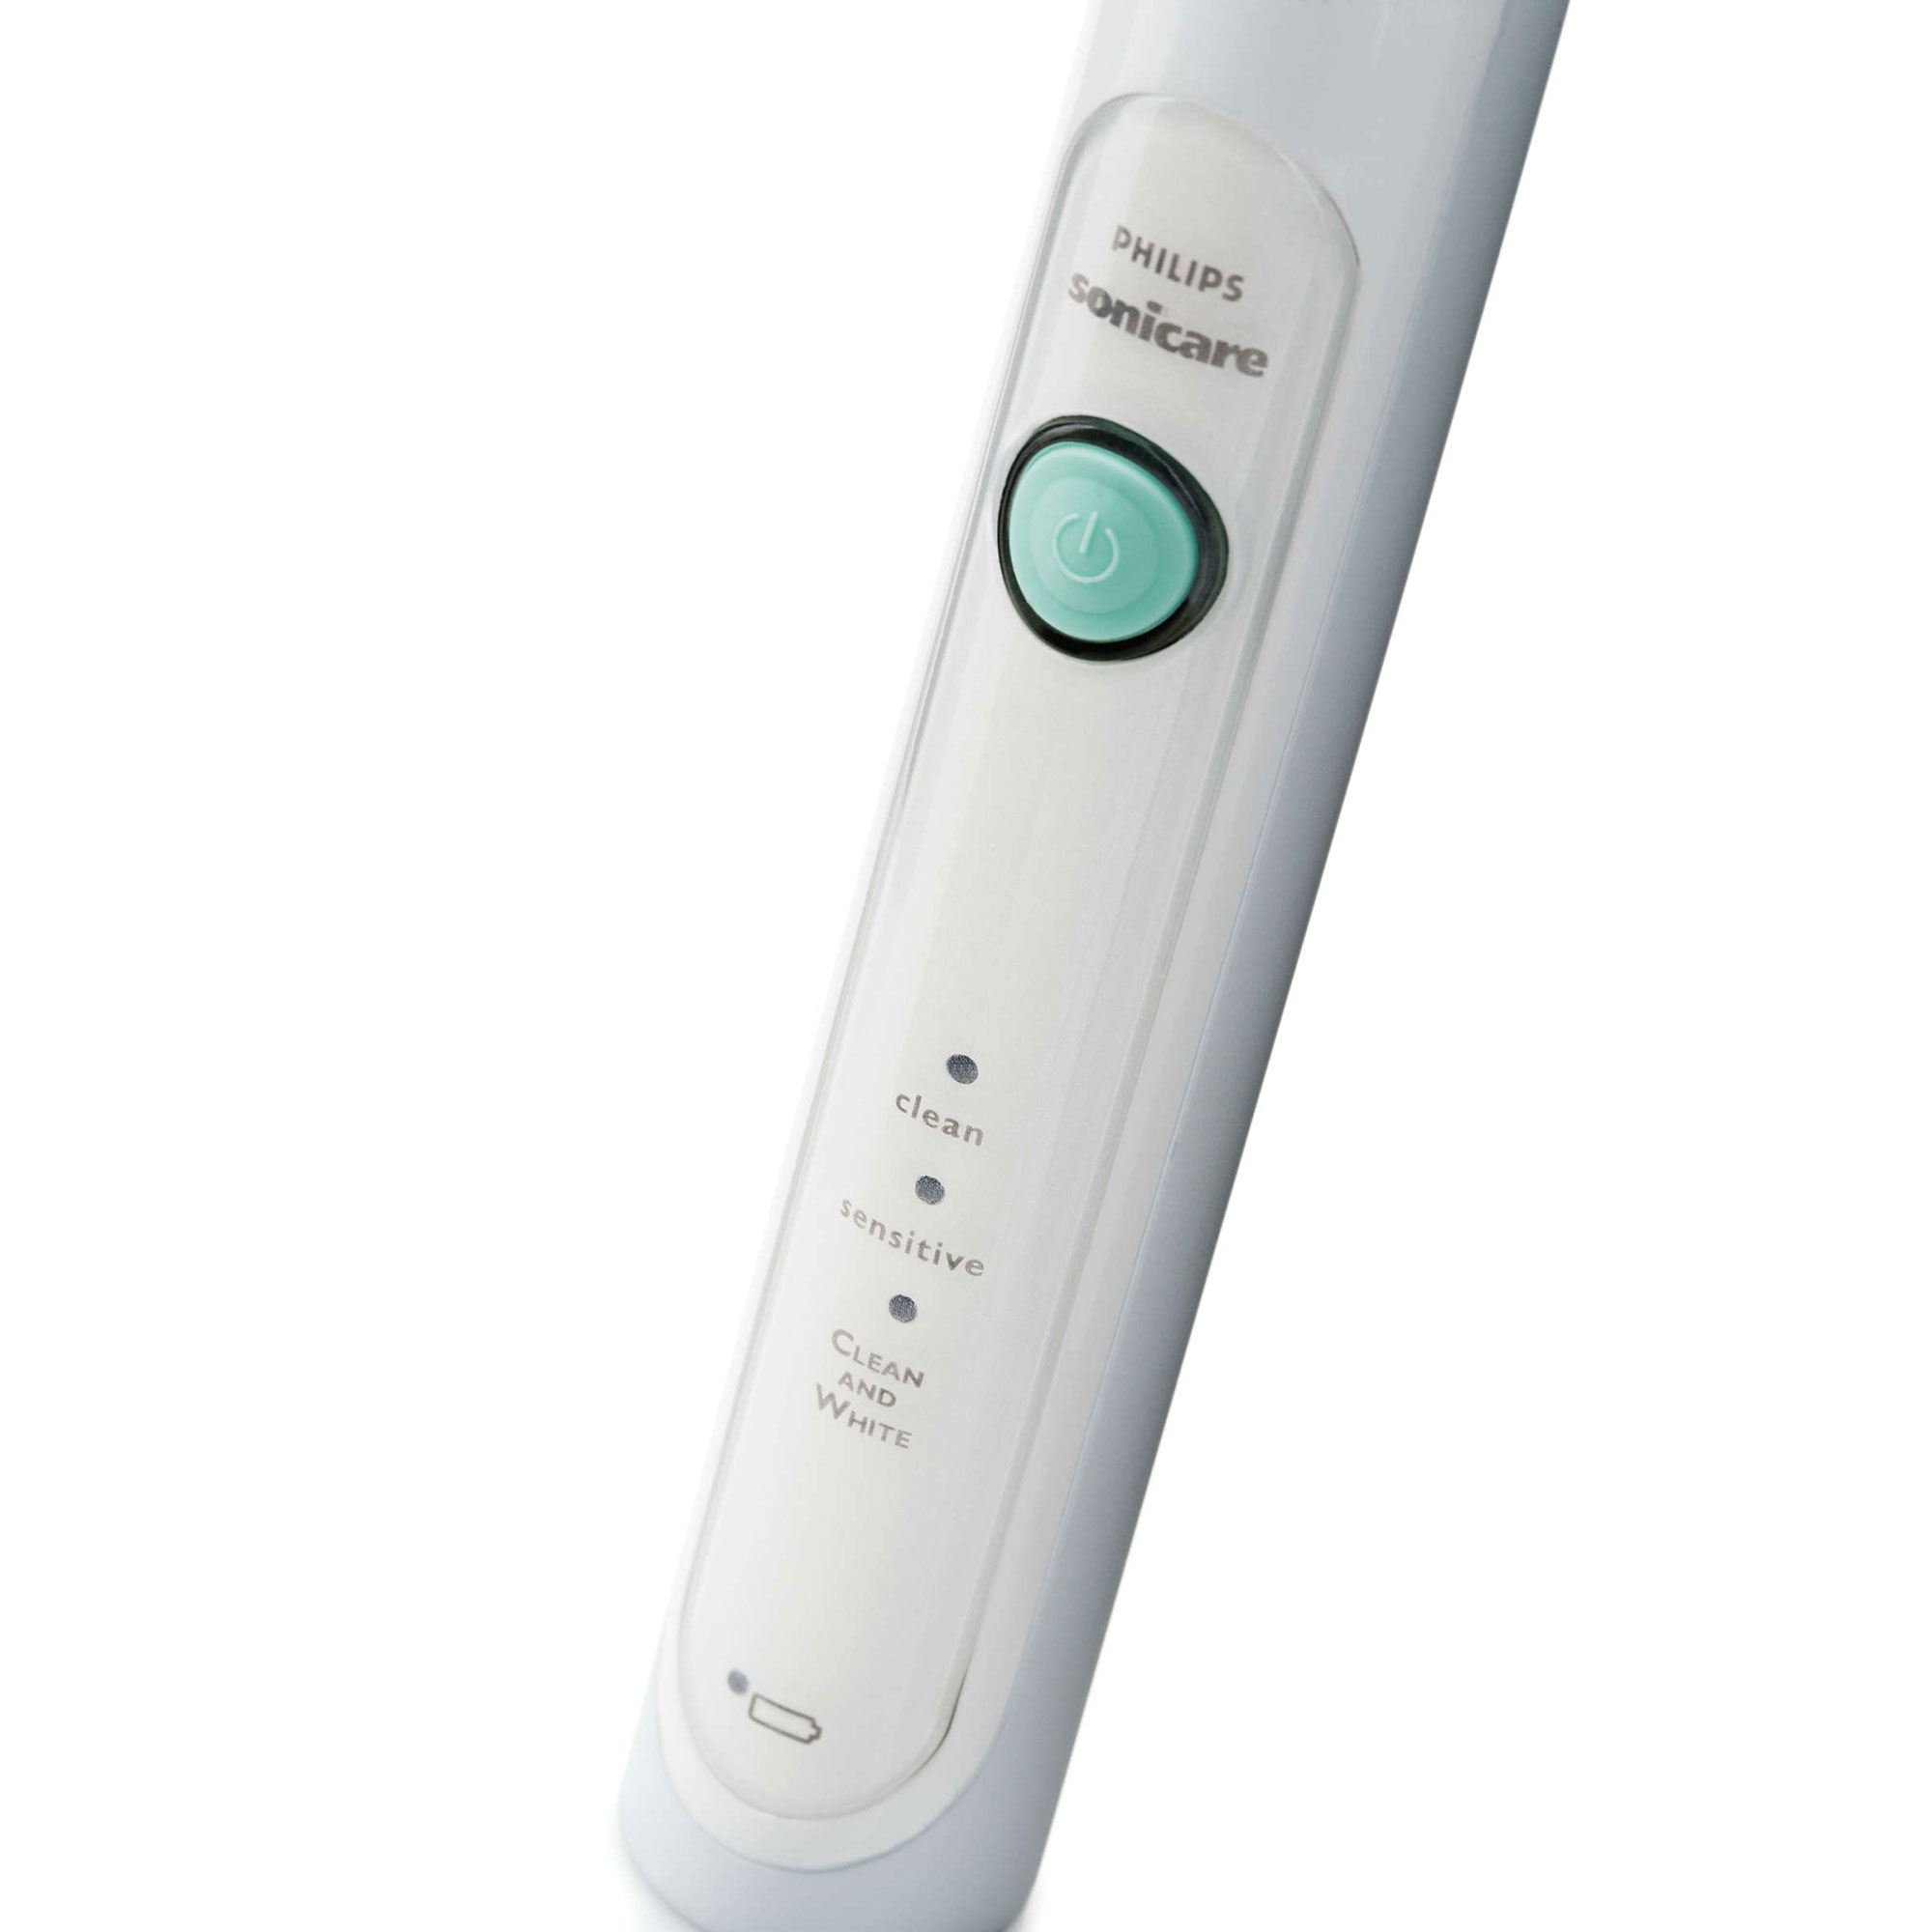 Philips Sonicare HealthyWhite Sonic Electric Rechargeable Toothbrush, Lavender - image 4 of 4